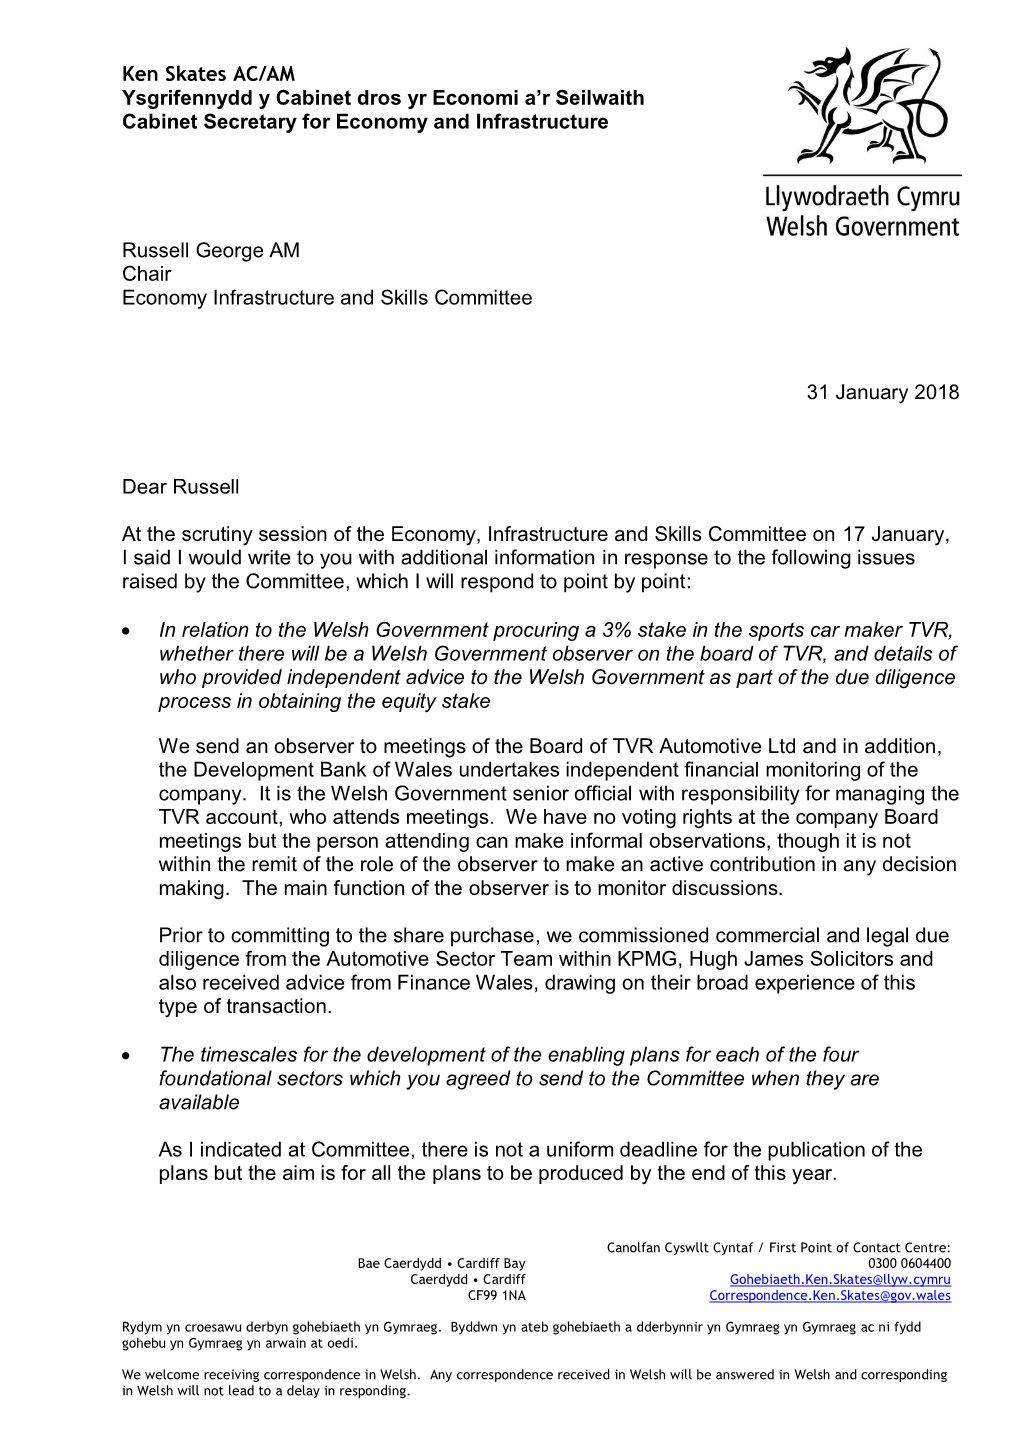 Correspondence from the Cabinet Secretary For